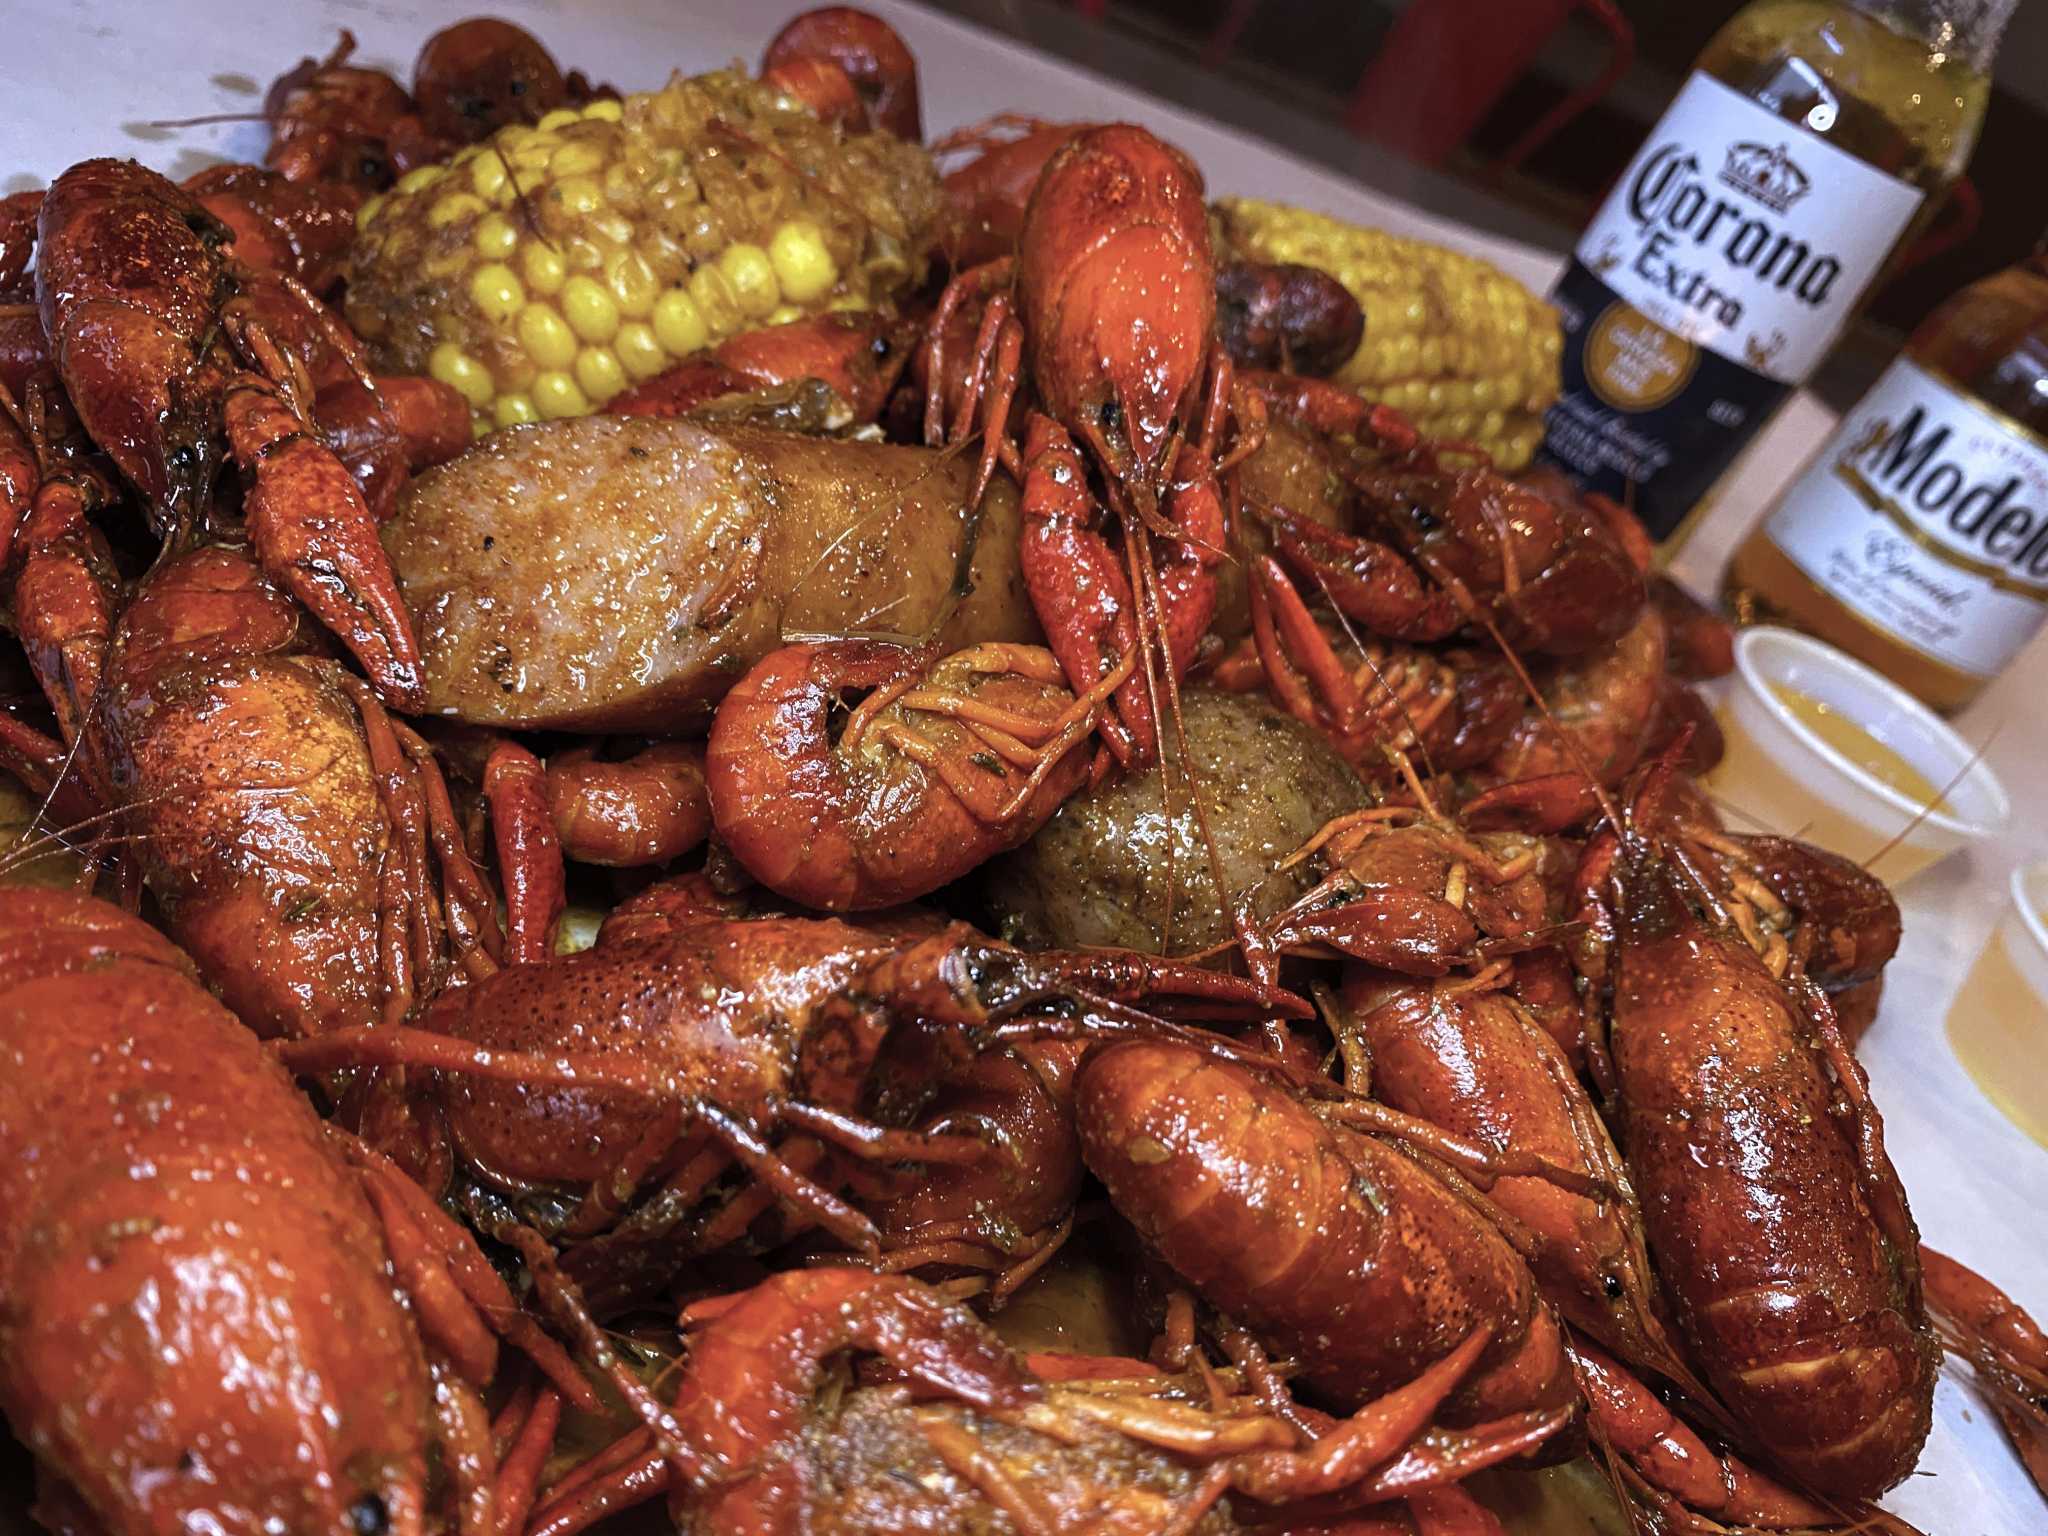 3 great restaurants for live crawfish in San Antonio and New Braunfels